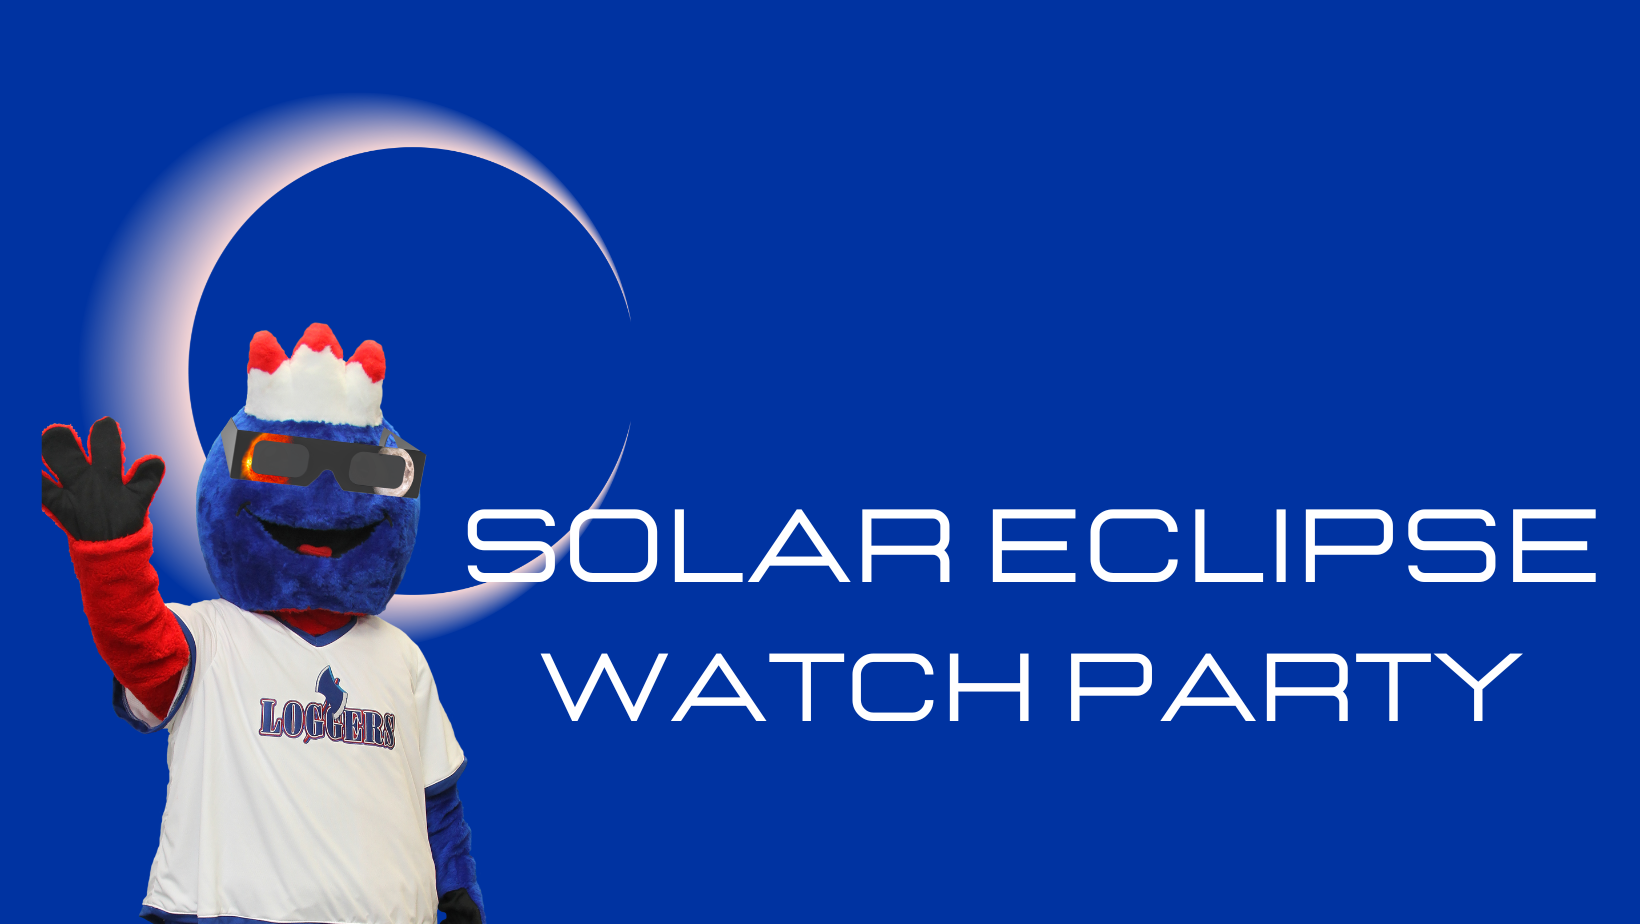 Blue graphic with an eclipsing sun. There is a college mascot standing in front. The mascot is red and blue in color. There is white text that reads "solar eclipse watch party" in white text.